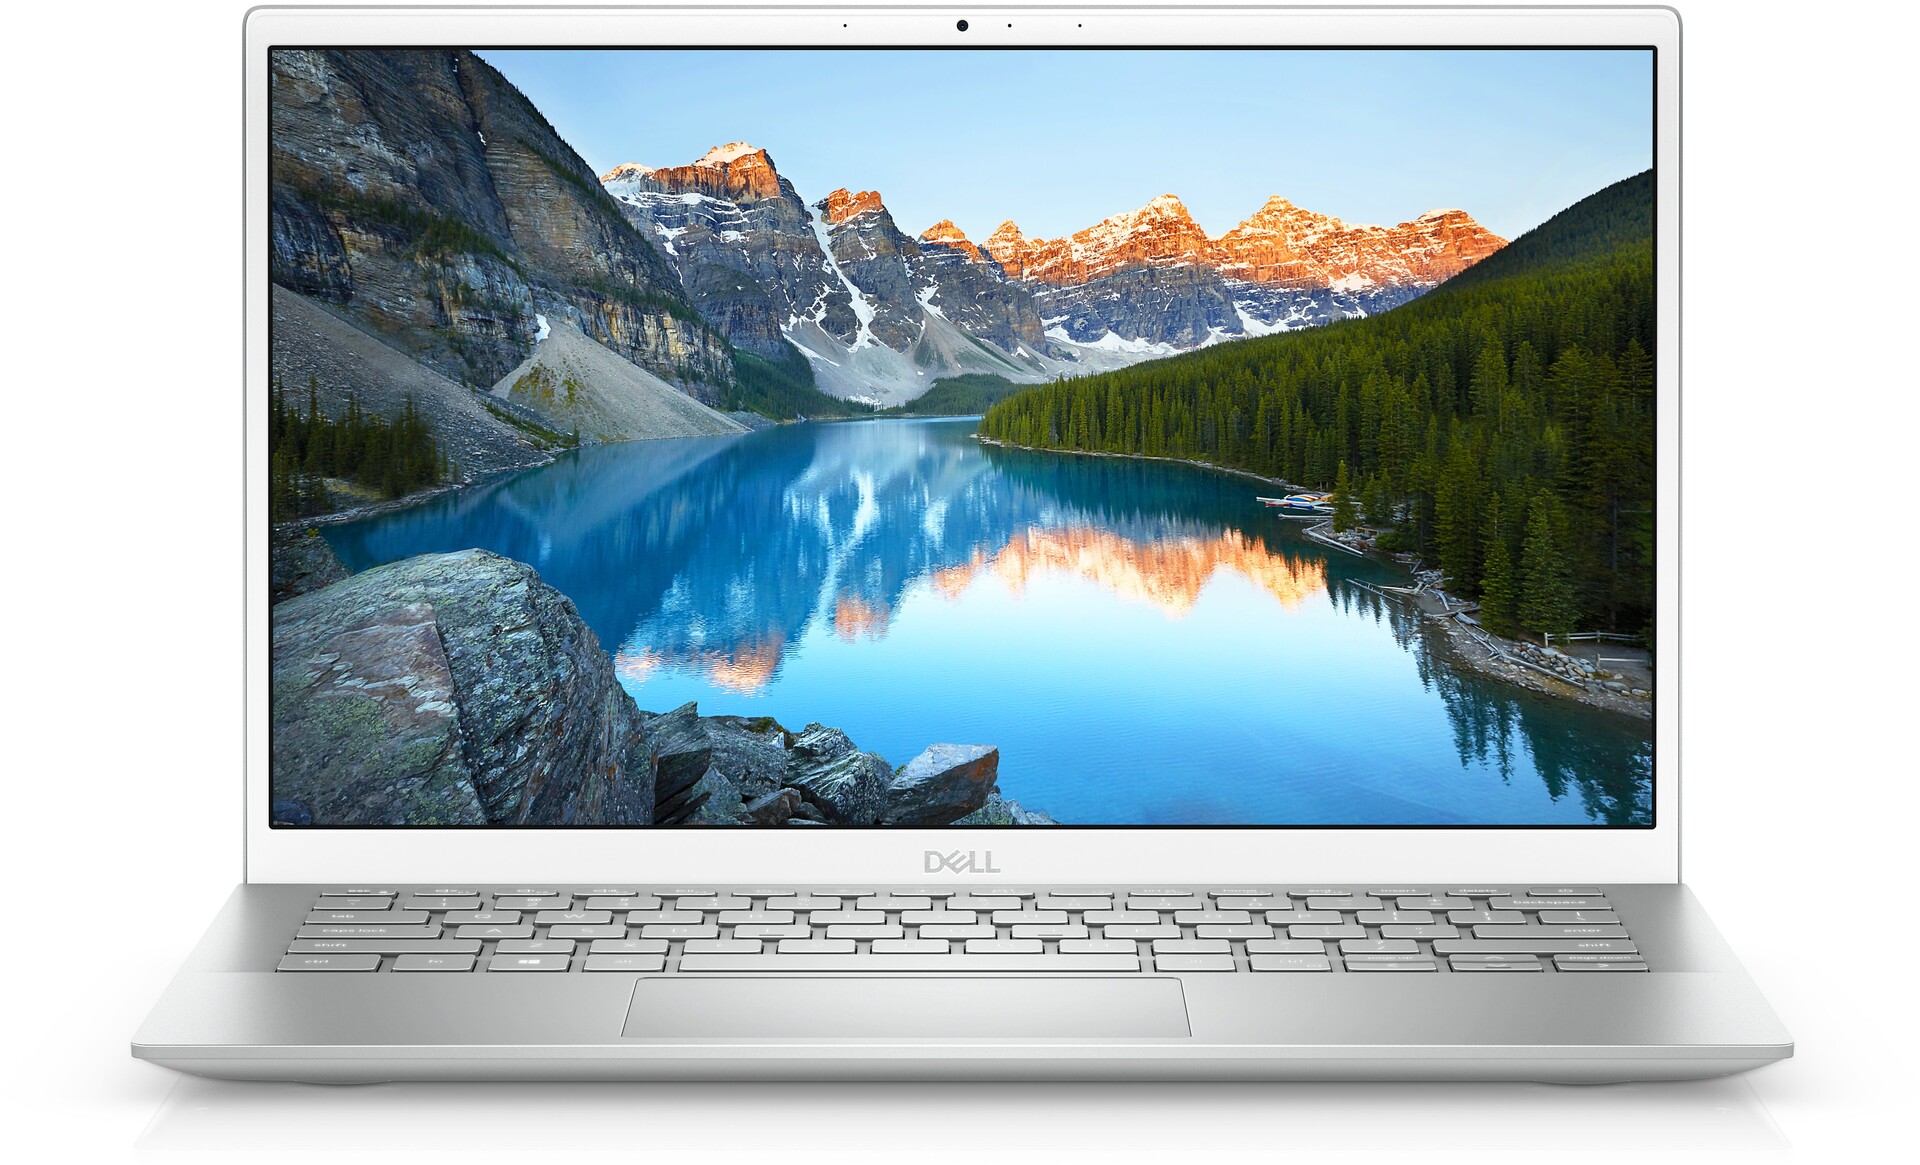 Dell Inspiron 13 5301: The subnotebook is stylish, but it shows a 